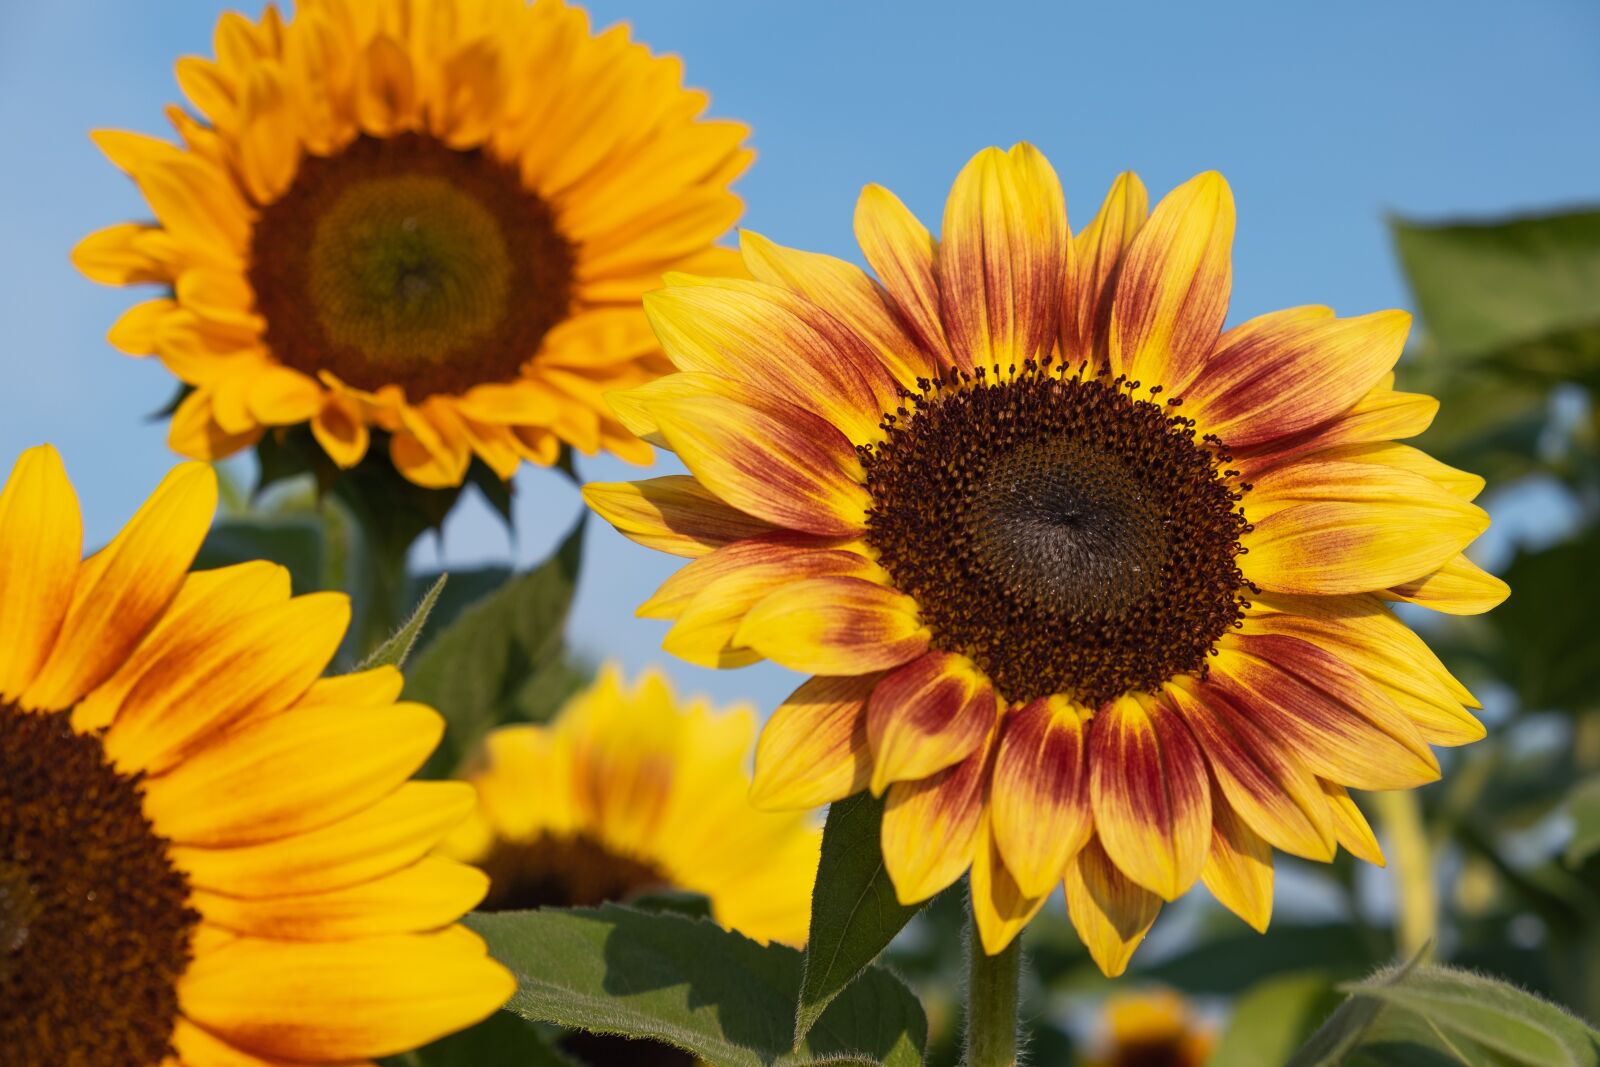 Fujifilm X-T30 sample photo. Sunflower, flower, colorful photography